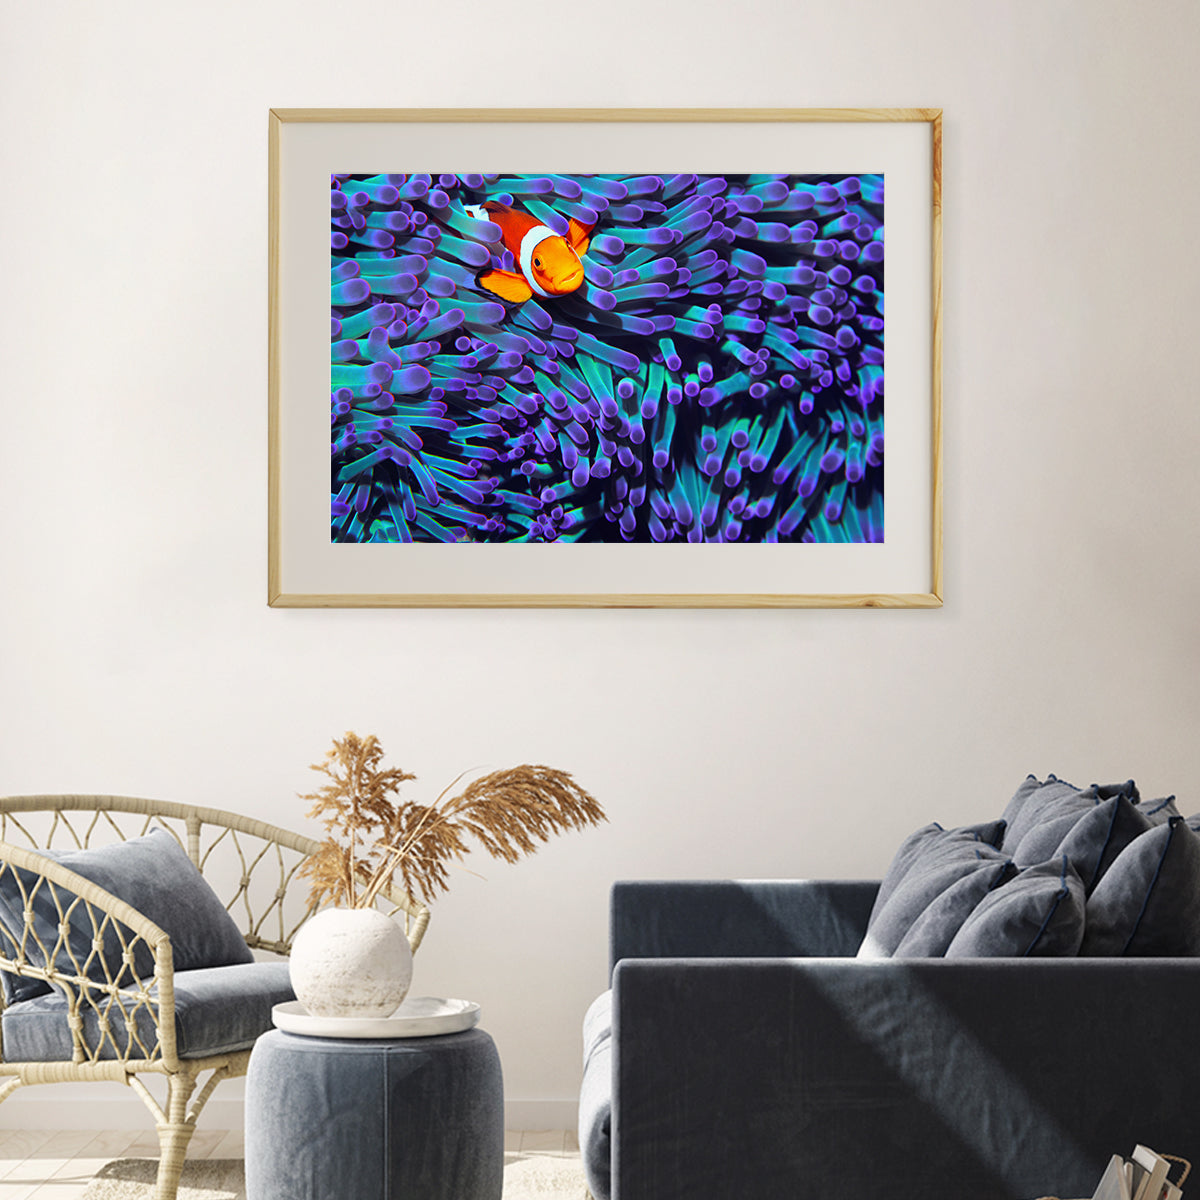 Clown Anemonefish Decorations For Home Poster-Horizontal Posters NOT FRAMED-CetArt-10″x8″ inches-CetArt